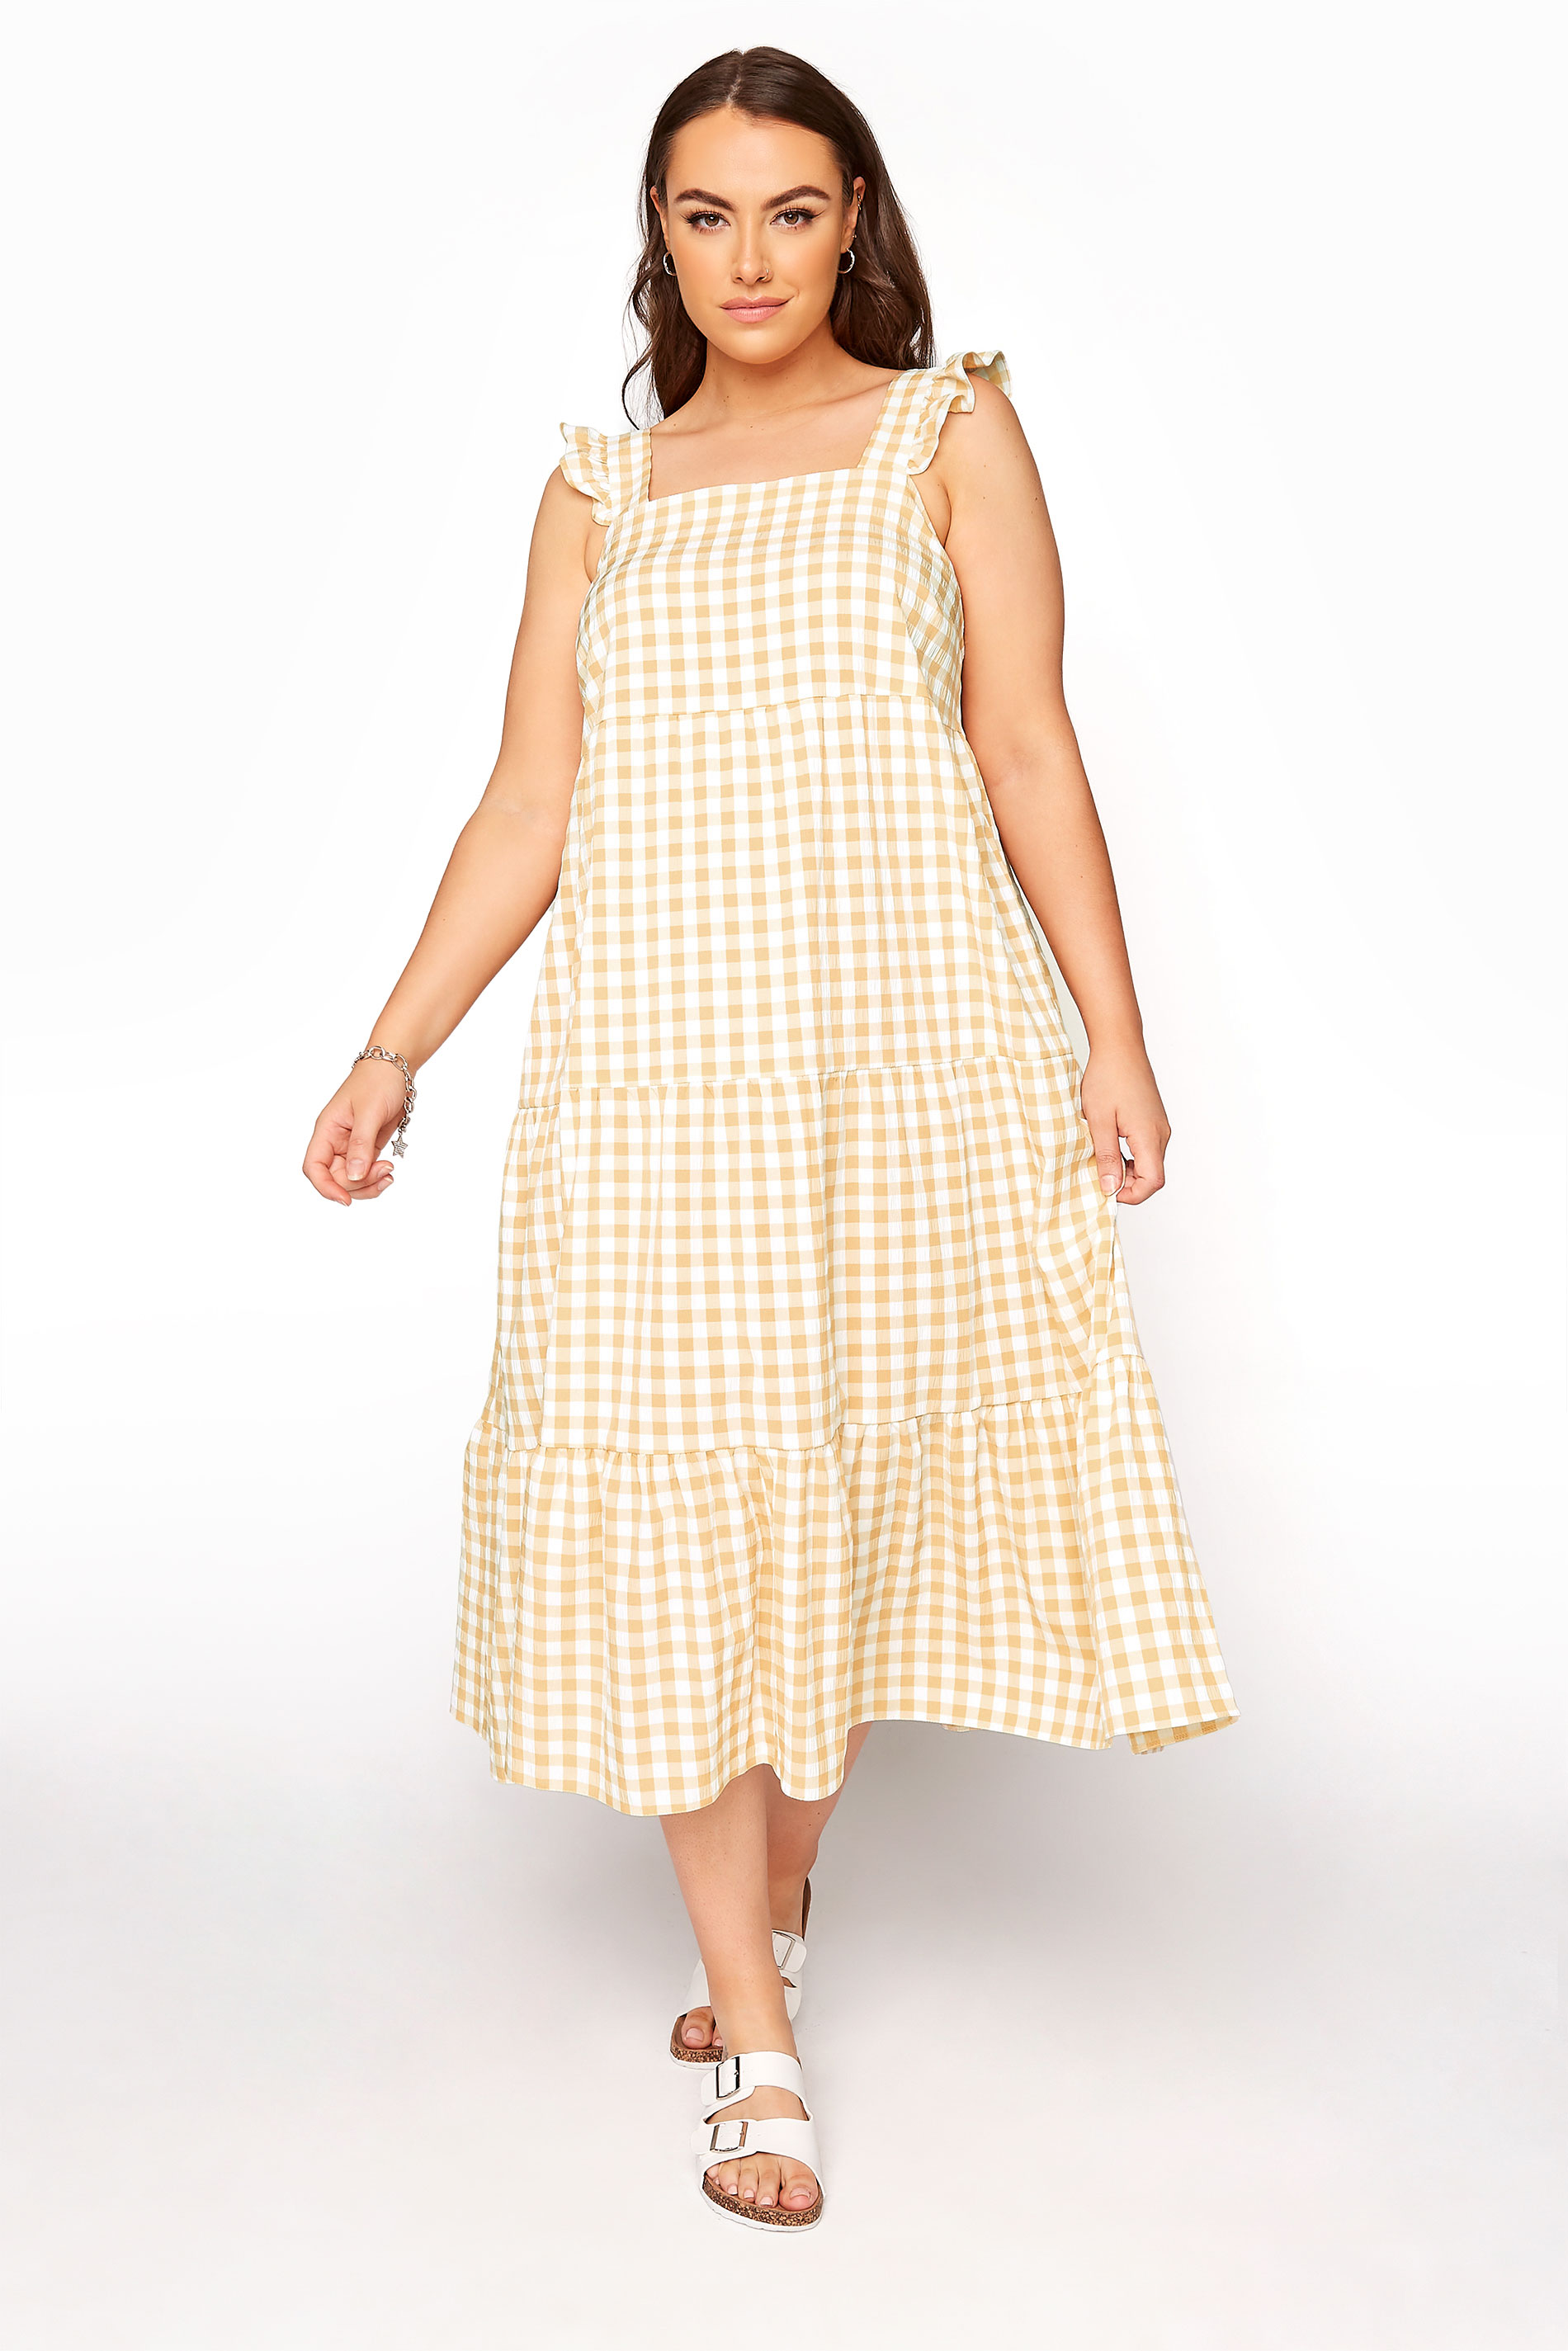 YOURS LONDON Curve Yellow Gingham Frill Dress 1